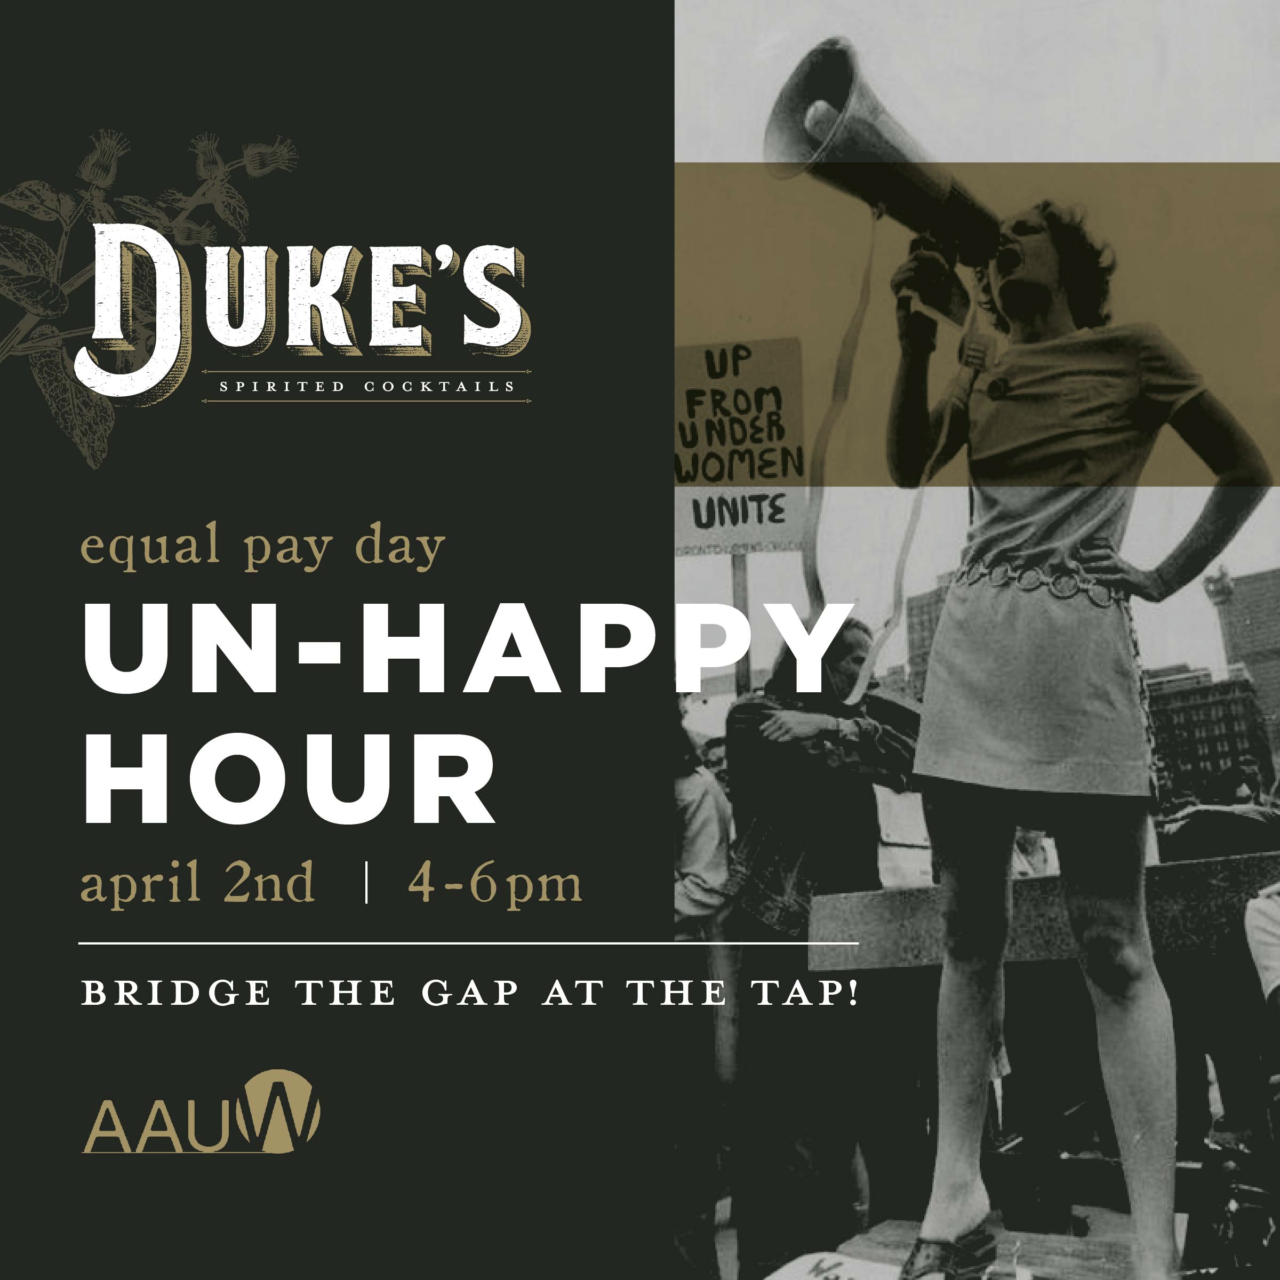 Bridge the Gap at the Tap at Duke's Equal Pay Day Un-Happy Hour, hosted by Healdsburg AAUW 